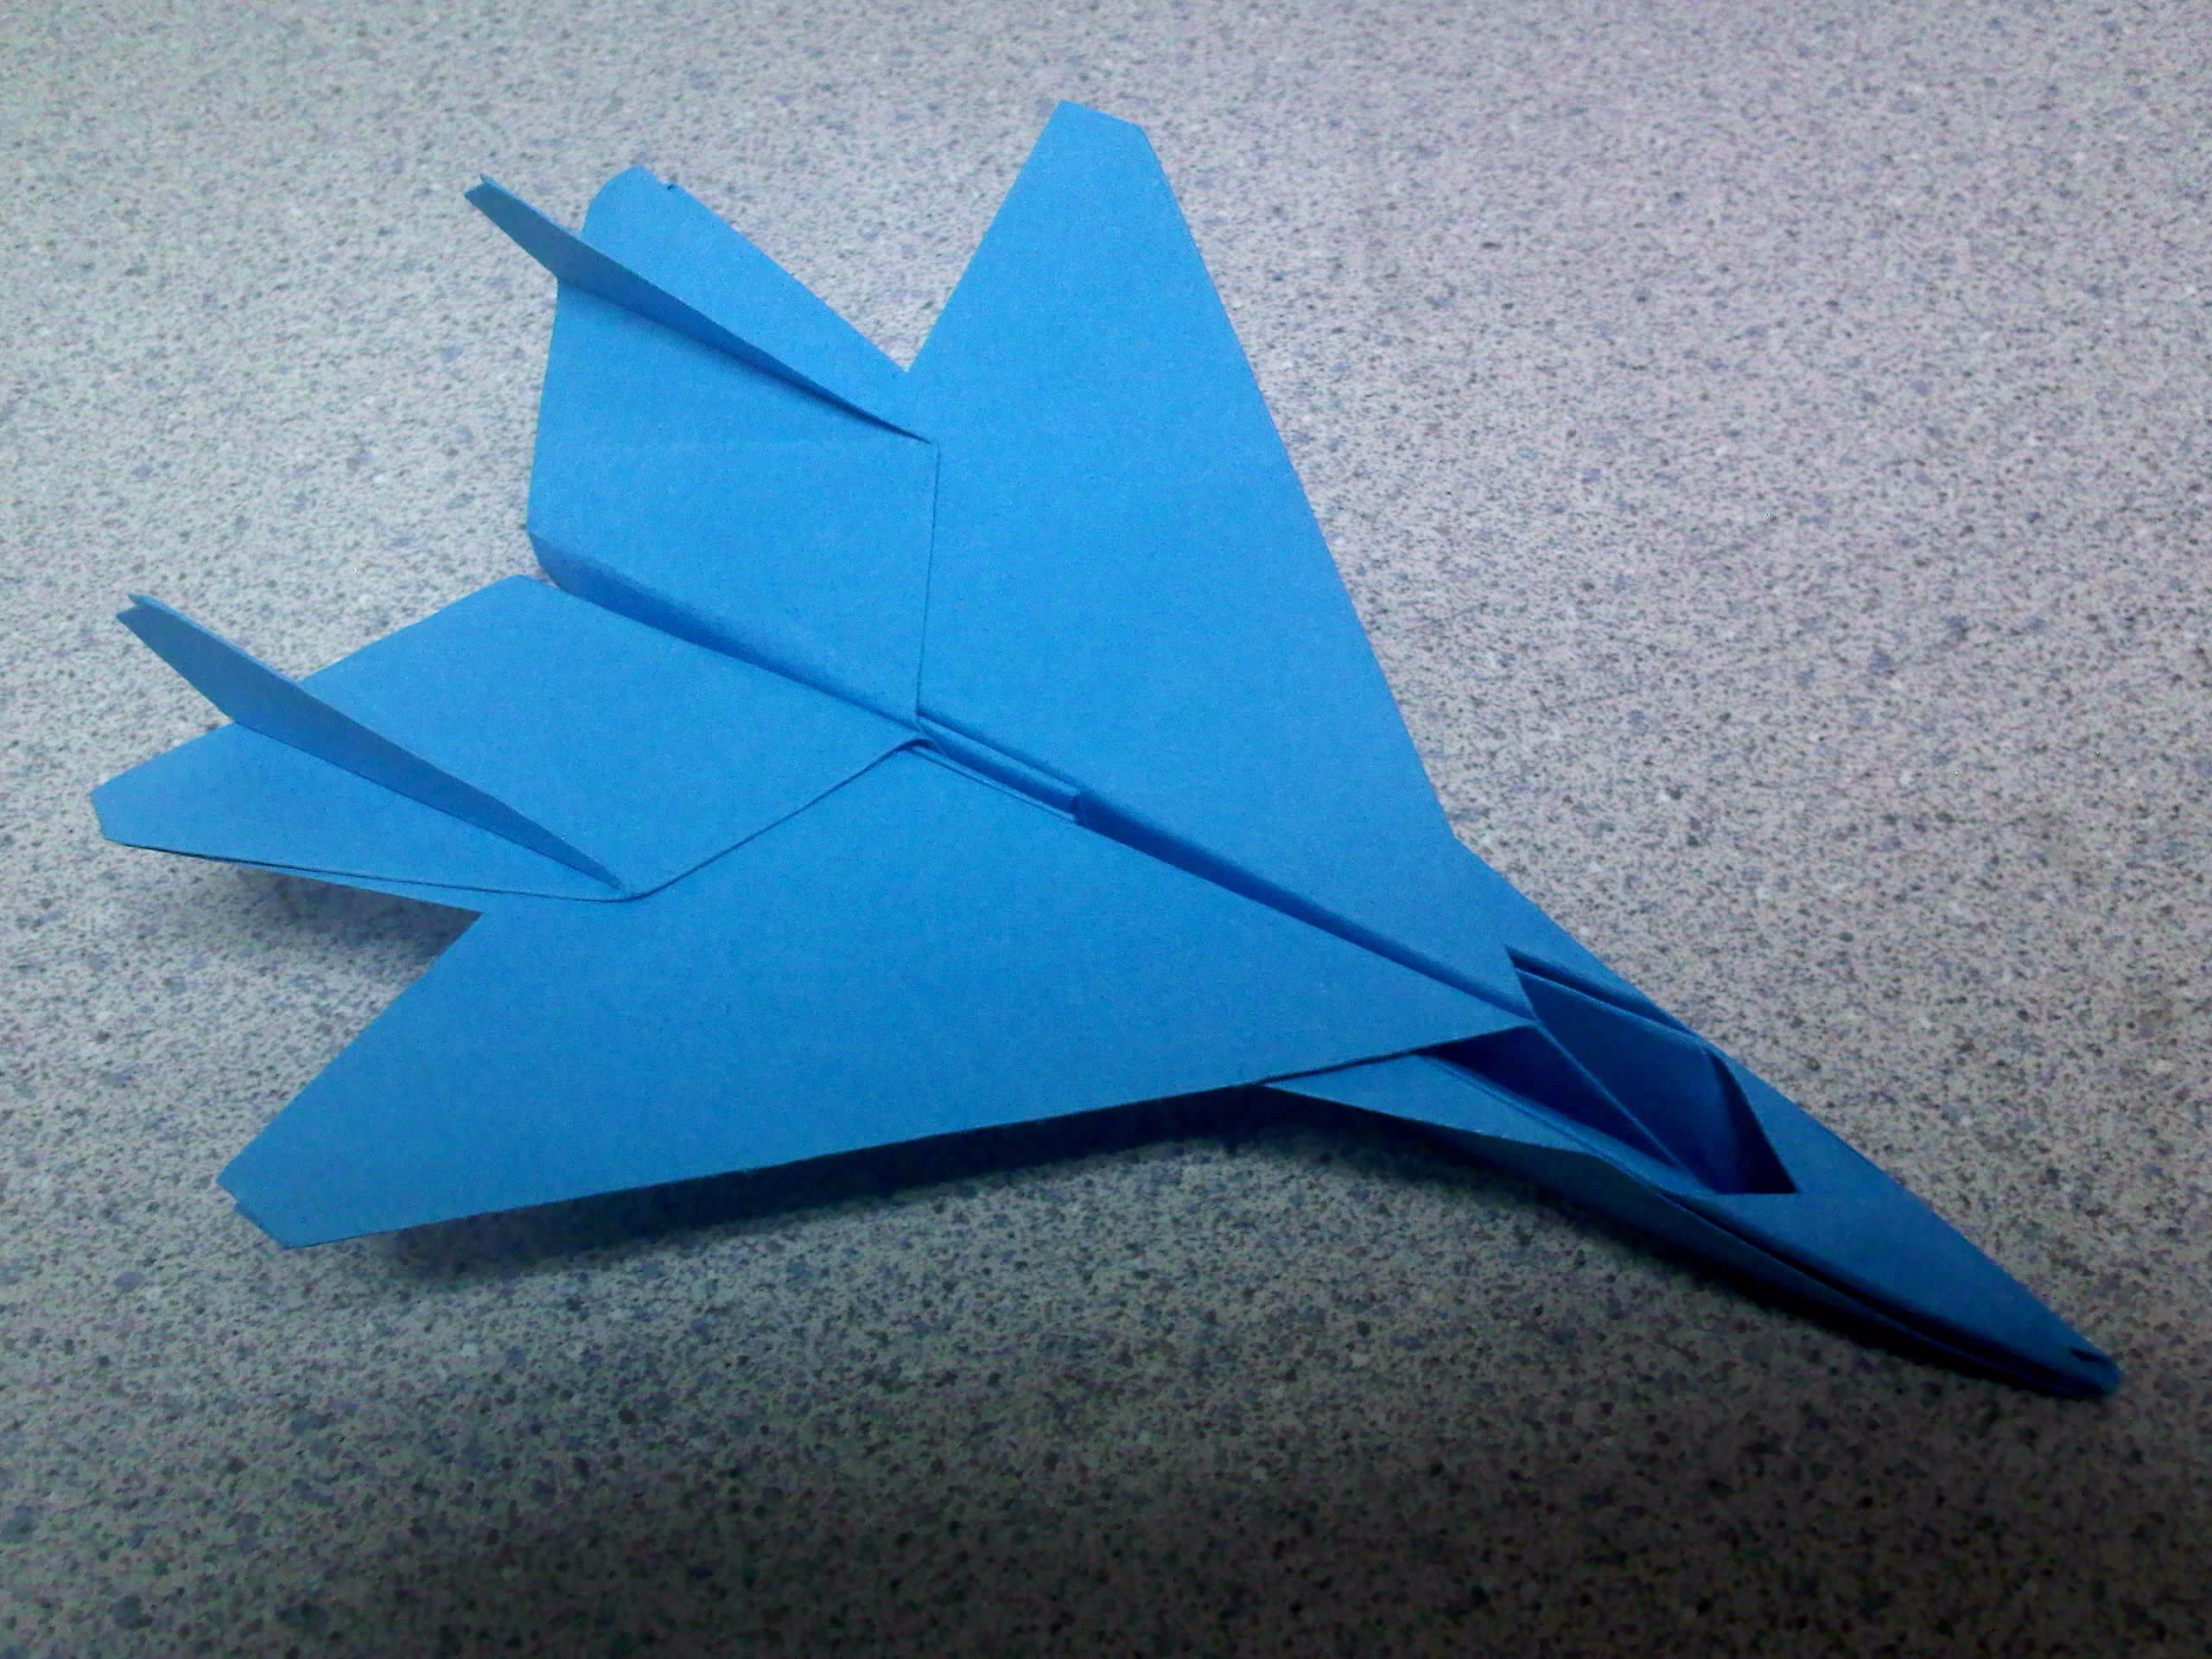 Blue Origami F15 Fighter Jet By Theorigamiarchitect On